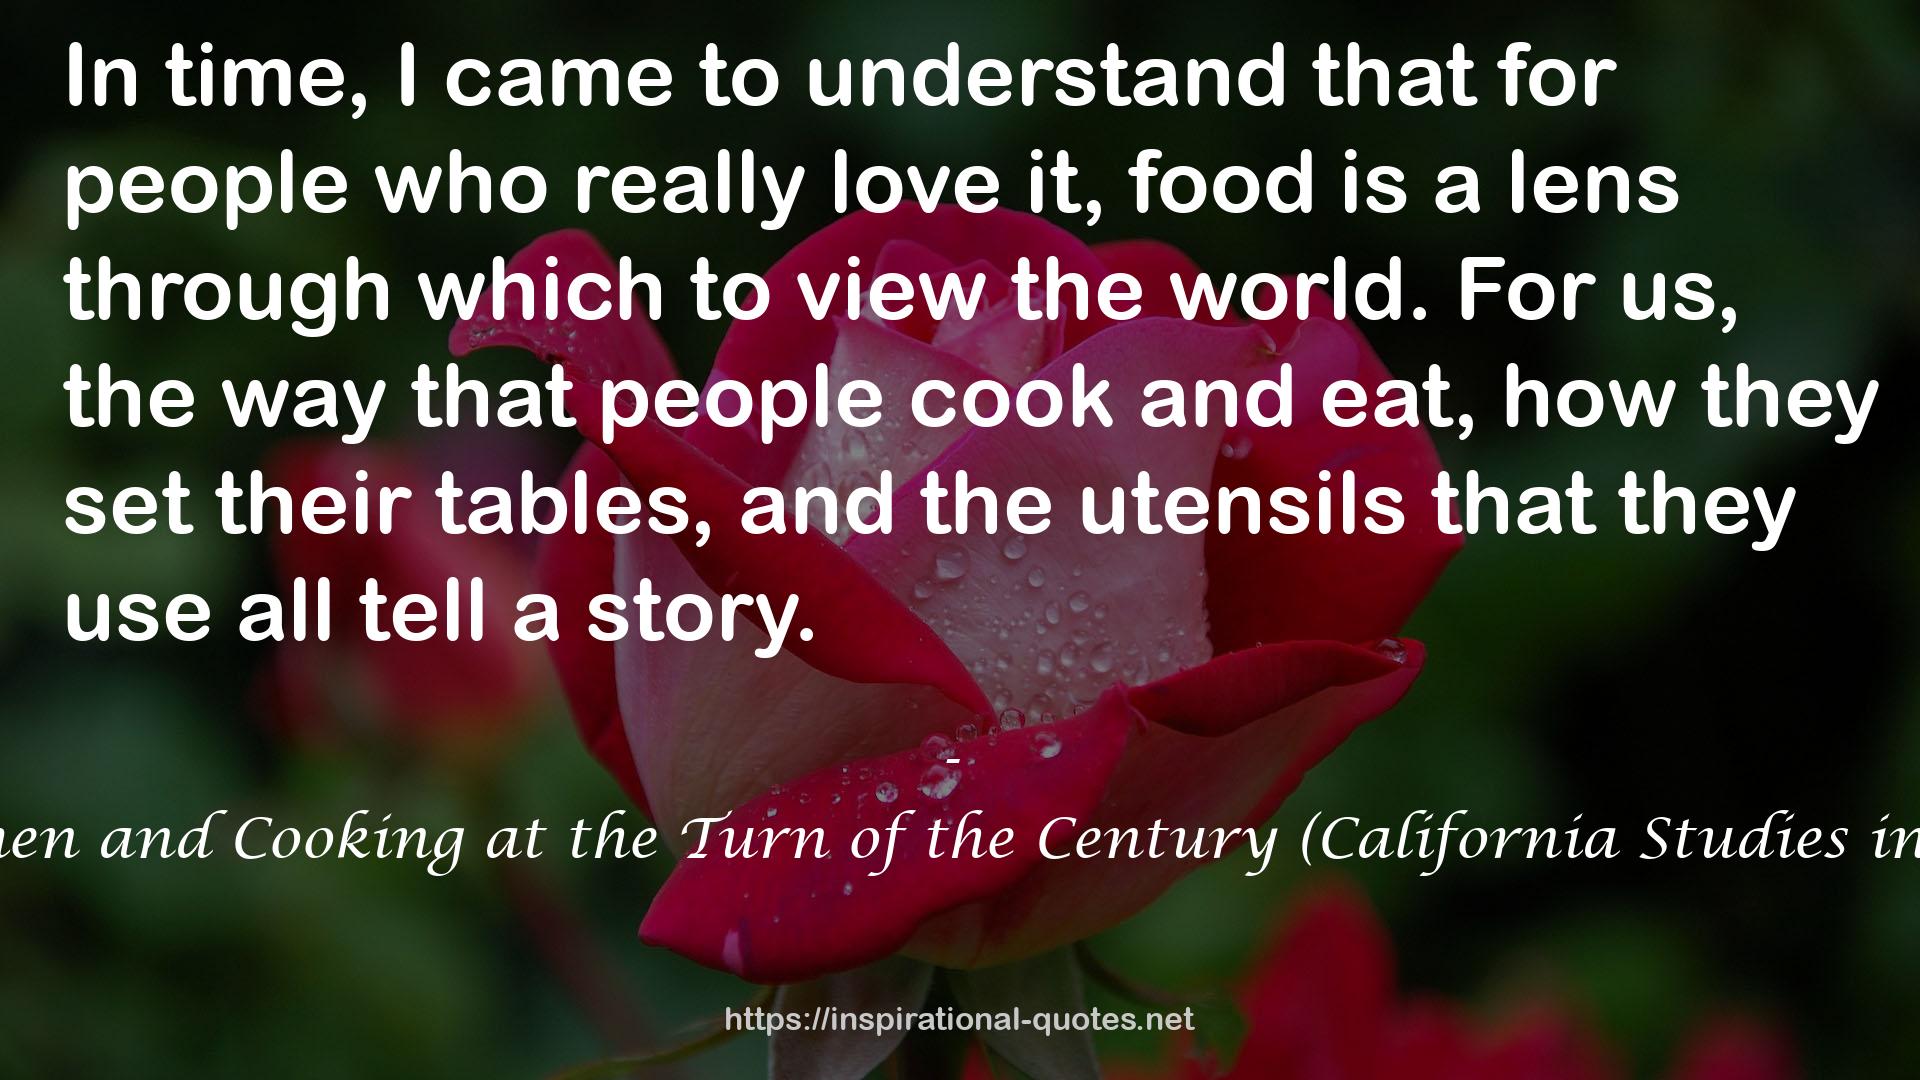 Perfection Salad: Women and Cooking at the Turn of the Century (California Studies in Food and Culture, 24) QUOTES